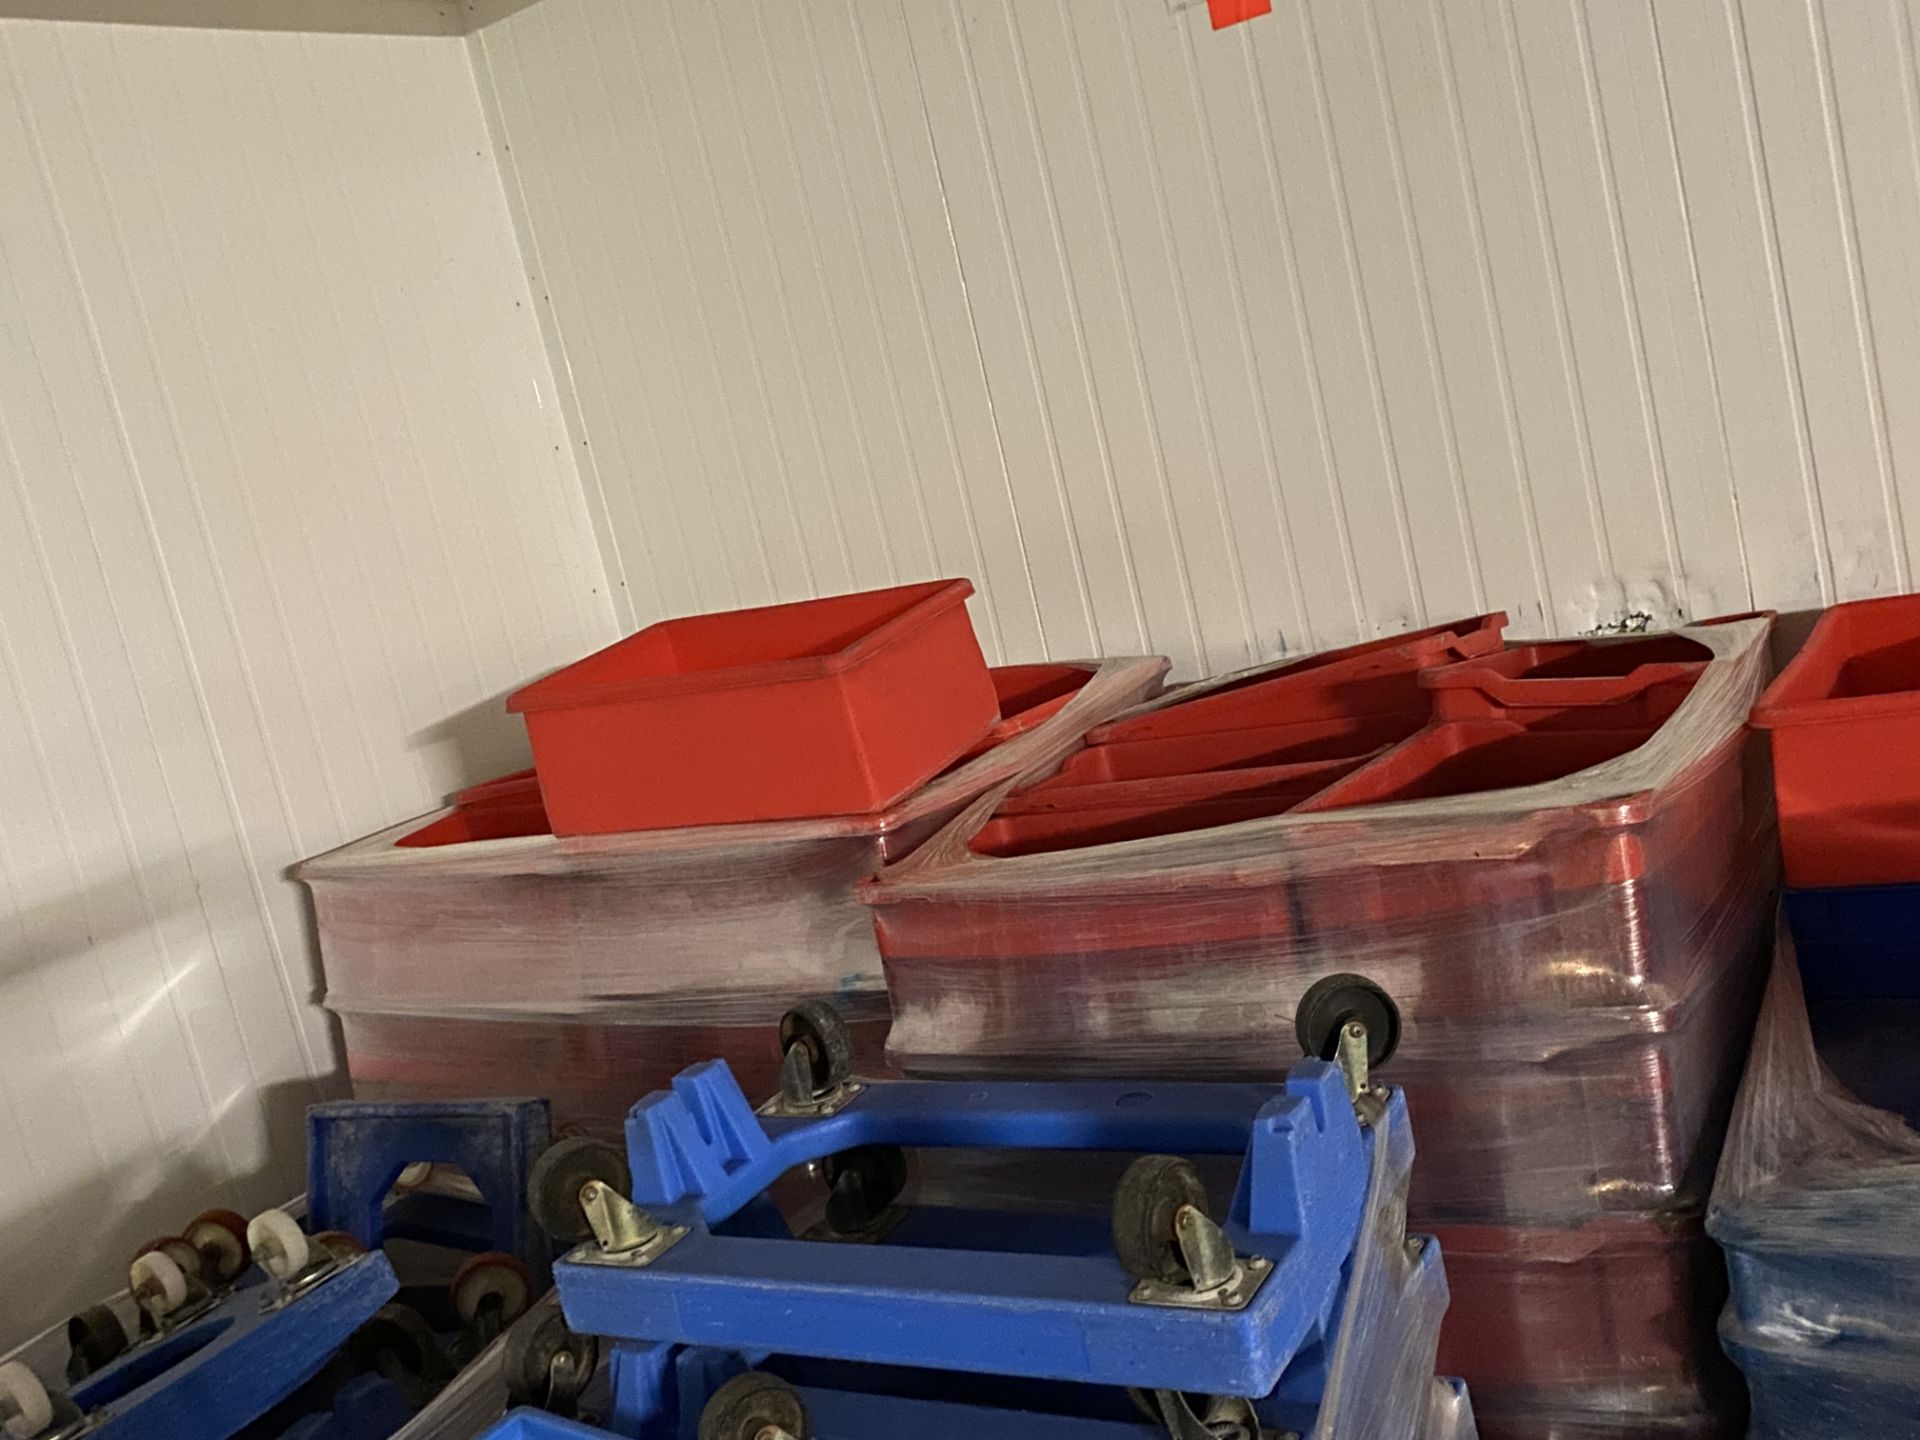 2 X PALLETS OF RED TRAYS.